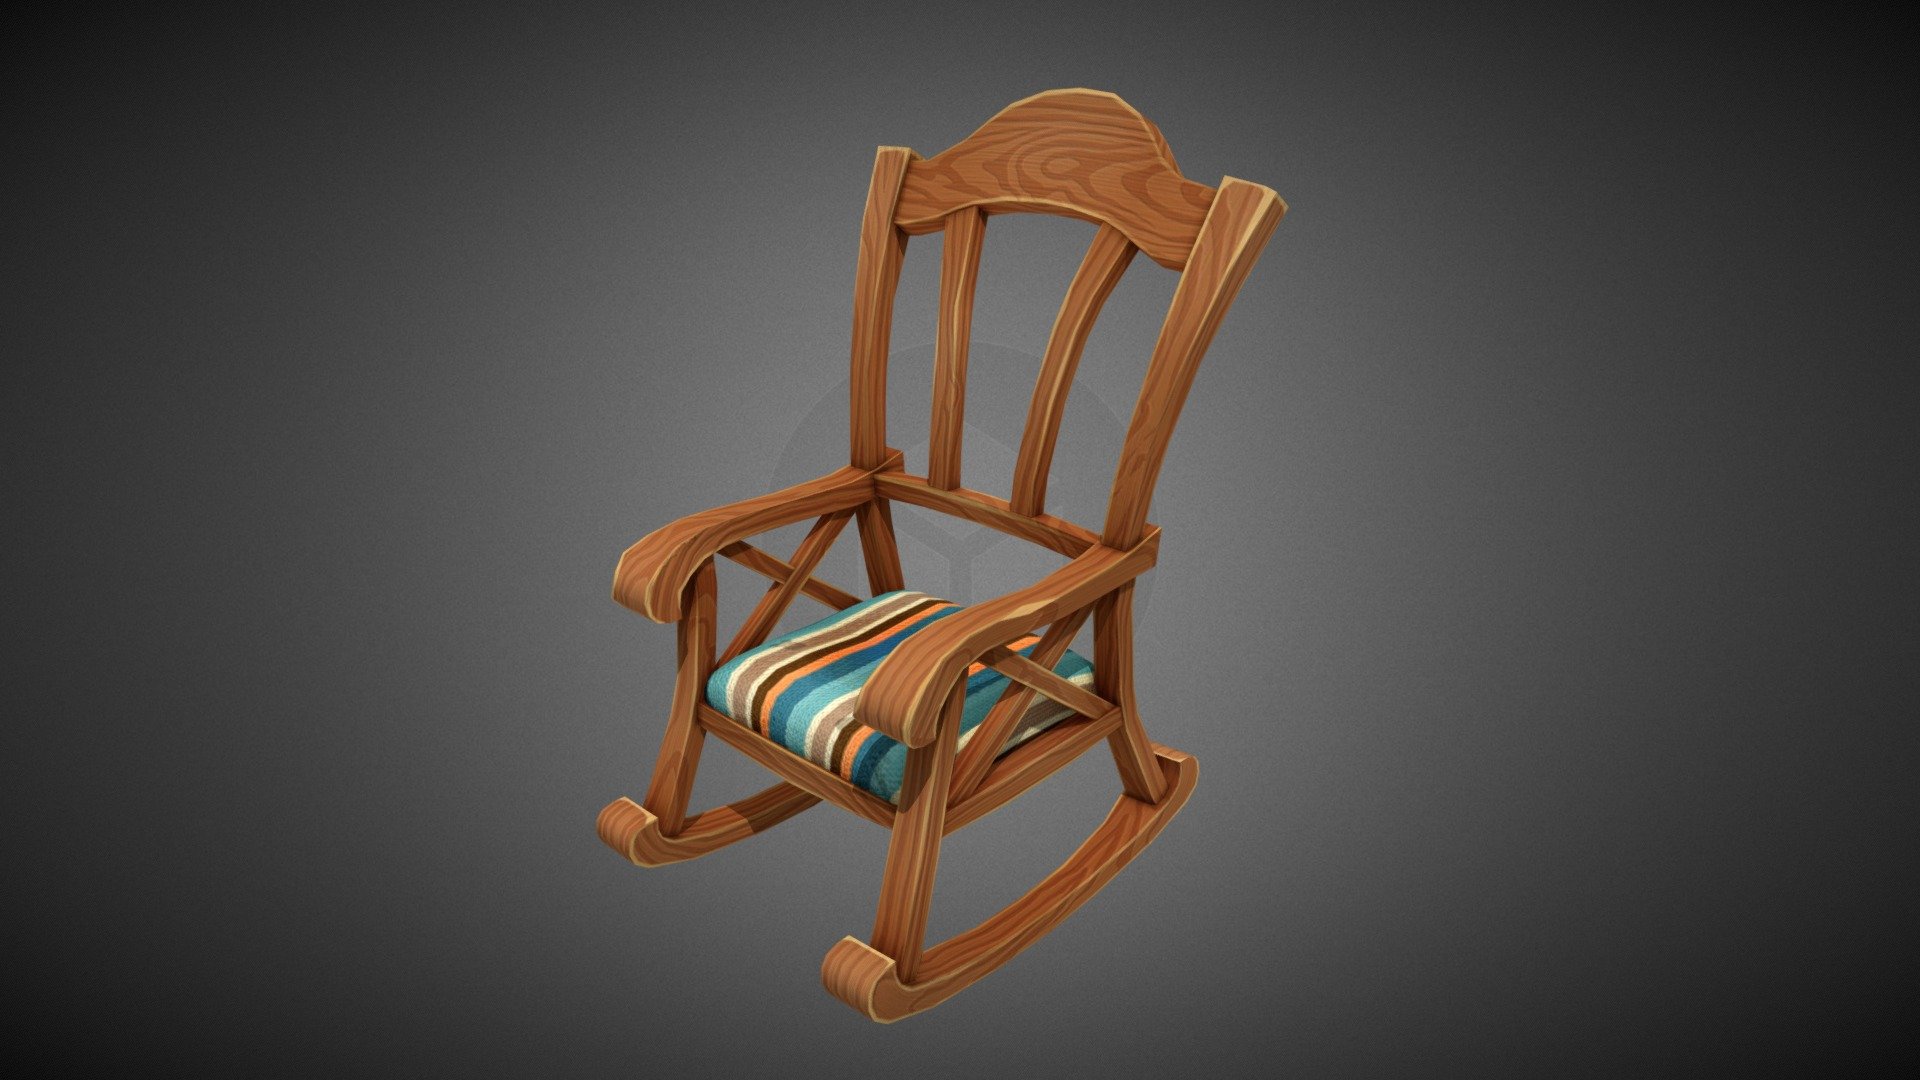 This is the model of an unused rocking chair in the &lsquo;Alpha 2' version of &lsquo;Hello,Neighbor!' - [Hello,Neighbor!] Alpha 2 - Rocking Chair - 3D model by monsieur.luiluix 3d model